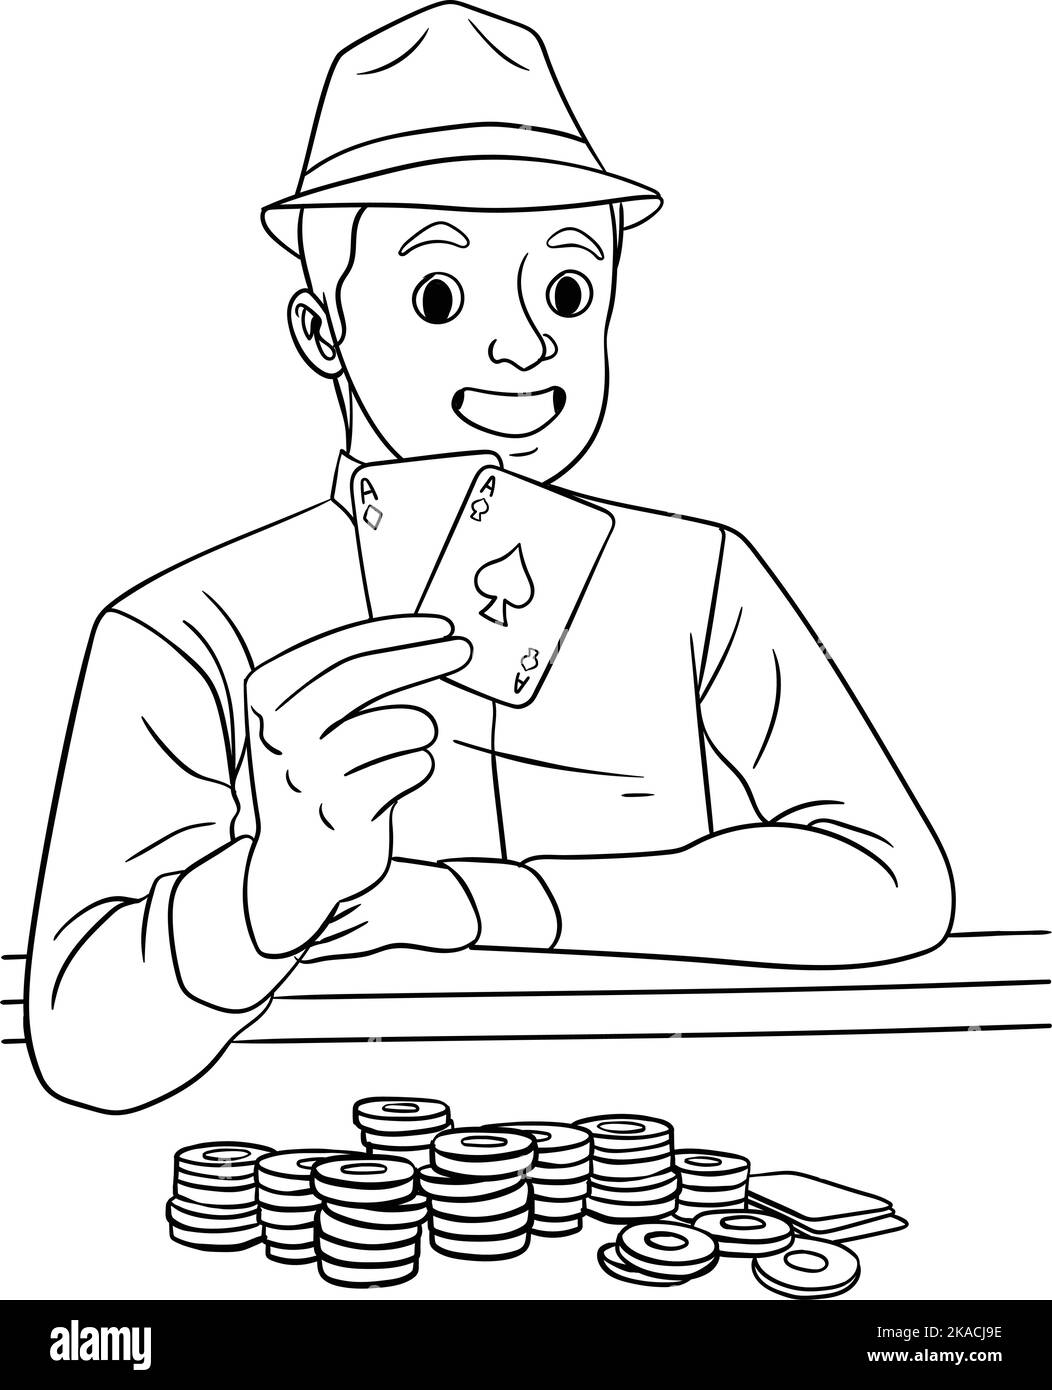 Poker Isolated Coloring Page for Kids Stock Vector